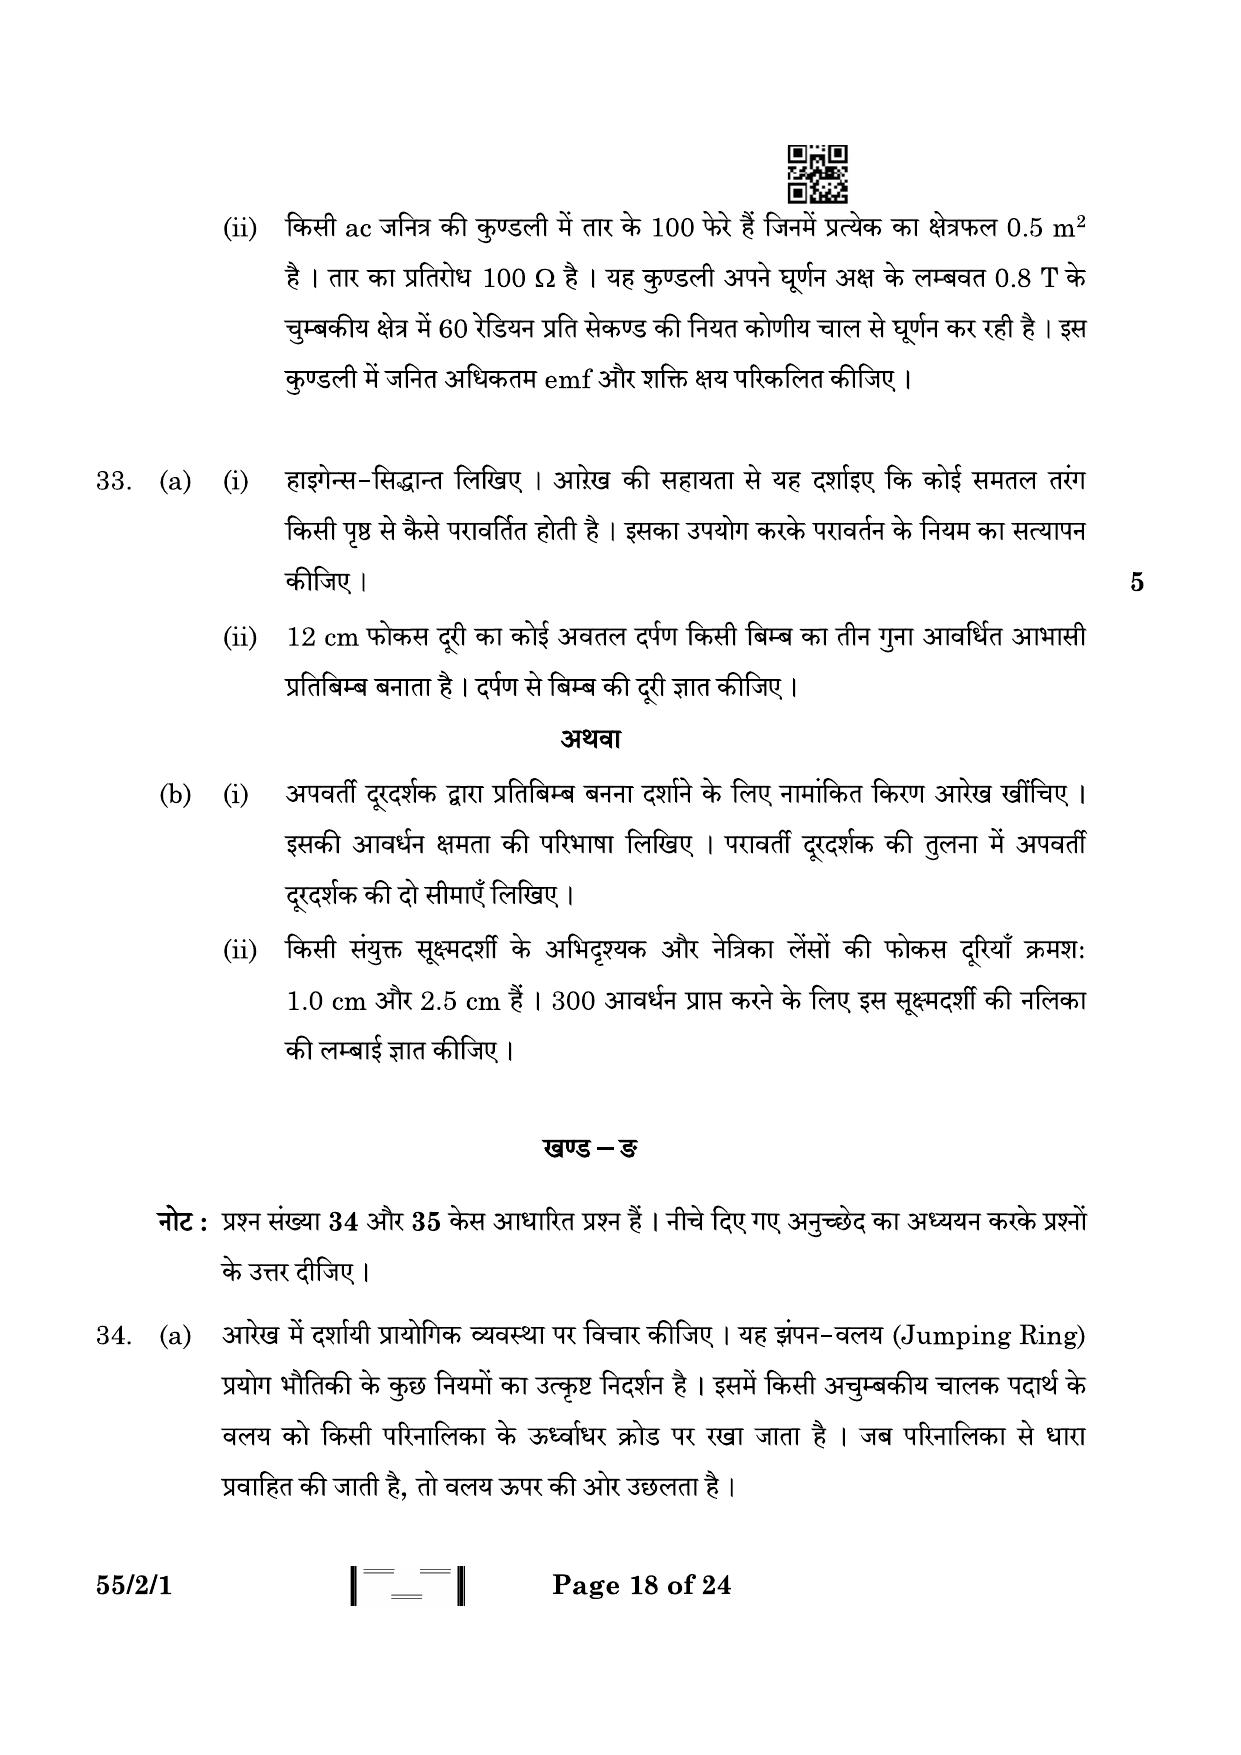 CBSE Class 12 55-2-1 Physics 2023 Question Paper - Page 18